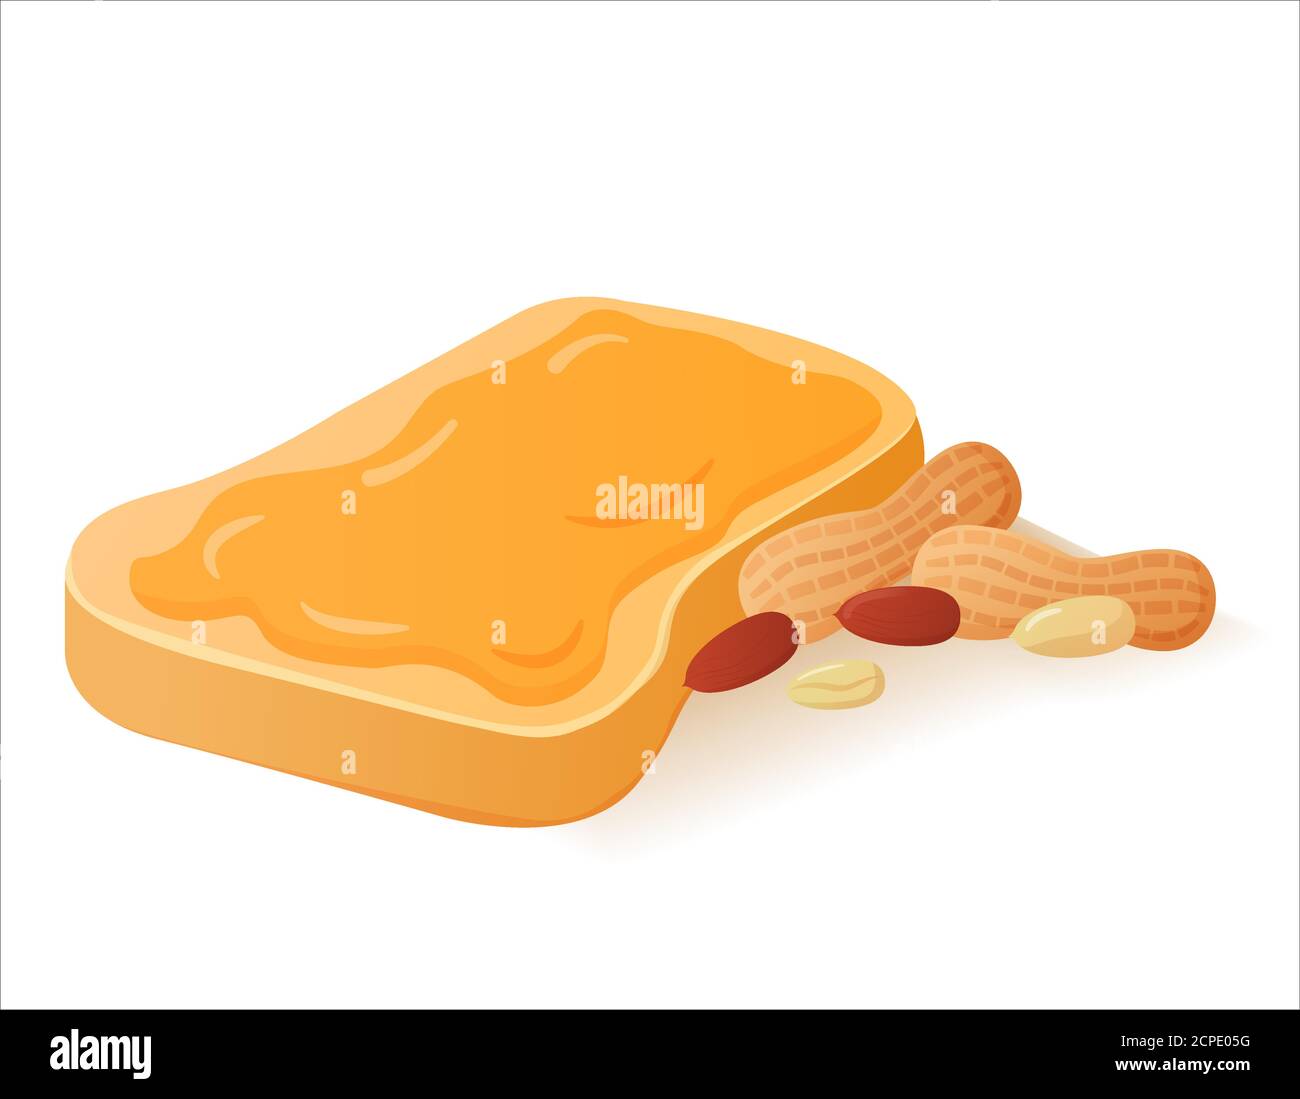 Sandwich with peanut butter on bread. Fried toast. Stock Vector